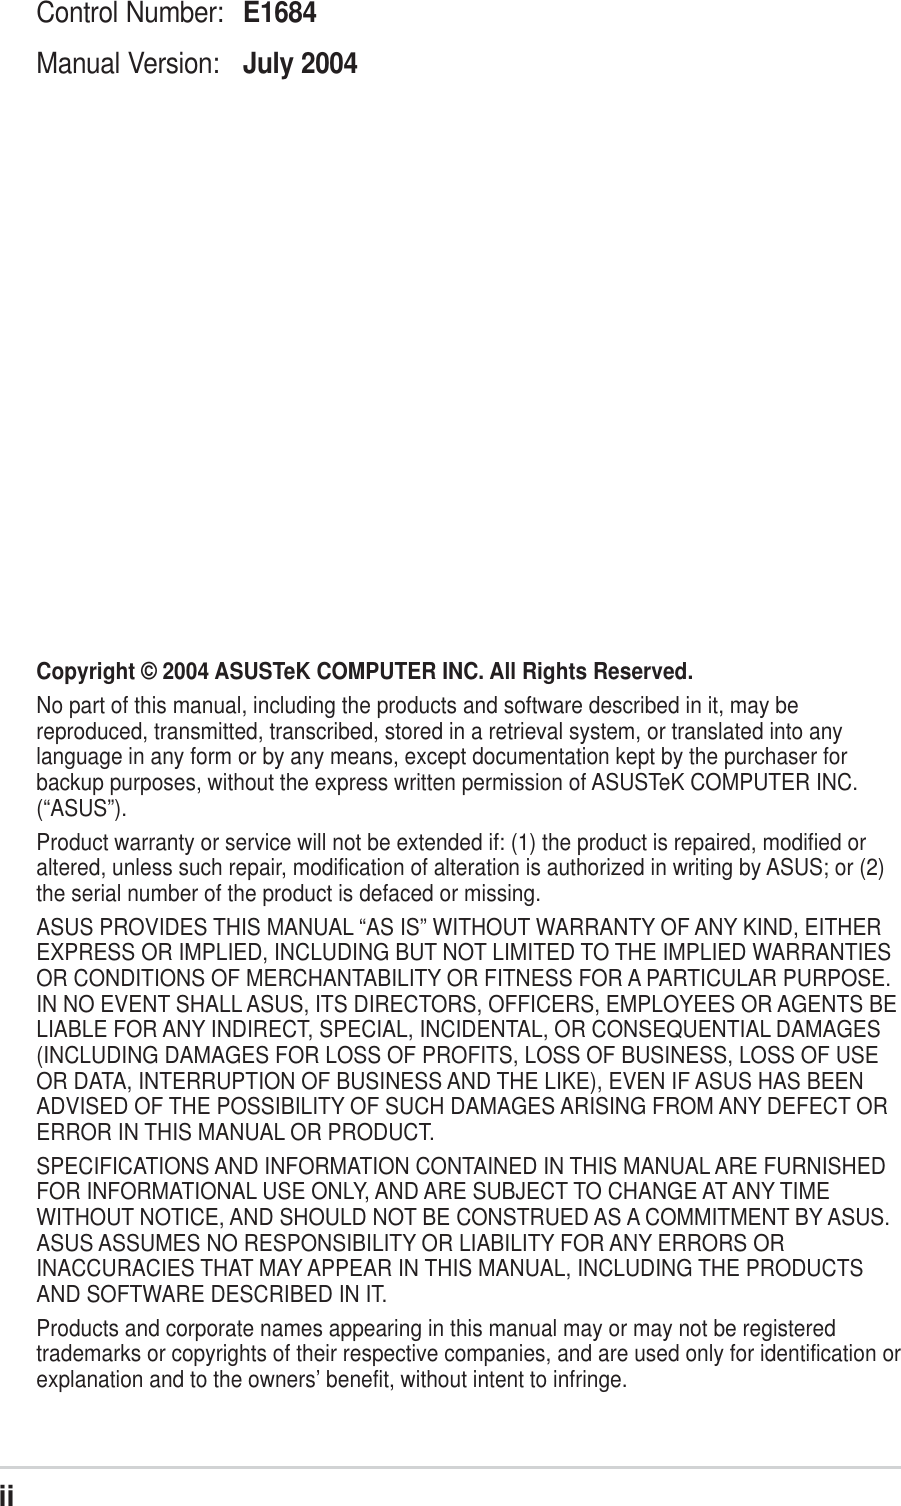 iiChecklistCopyright © 2004 ASUSTeK COMPUTER INC. All Rights Reserved.No part of this manual, including the products and software described in it, may bereproduced, transmitted, transcribed, stored in a retrieval system, or translated into anylanguage in any form or by any means, except documentation kept by the purchaser forbackup purposes, without the express written permission of ASUSTeK COMPUTER INC.(“ASUS”).Product warranty or service will not be extended if: (1) the product is repaired, modified oraltered, unless such repair, modification of alteration is authorized in writing by ASUS; or (2)the serial number of the product is defaced or missing.ASUS PROVIDES THIS MANUAL “AS IS” WITHOUT WARRANTY OF ANY KIND, EITHEREXPRESS OR IMPLIED, INCLUDING BUT NOT LIMITED TO THE IMPLIED WARRANTIESOR CONDITIONS OF MERCHANTABILITY OR FITNESS FOR A PARTICULAR PURPOSE.IN NO EVENT SHALL ASUS, ITS DIRECTORS, OFFICERS, EMPLOYEES OR AGENTS BELIABLE FOR ANY INDIRECT, SPECIAL, INCIDENTAL, OR CONSEQUENTIAL DAMAGES(INCLUDING DAMAGES FOR LOSS OF PROFITS, LOSS OF BUSINESS, LOSS OF USEOR DATA, INTERRUPTION OF BUSINESS AND THE LIKE), EVEN IF ASUS HAS BEENADVISED OF THE POSSIBILITY OF SUCH DAMAGES ARISING FROM ANY DEFECT ORERROR IN THIS MANUAL OR PRODUCT.SPECIFICATIONS AND INFORMATION CONTAINED IN THIS MANUAL ARE FURNISHEDFOR INFORMATIONAL USE ONLY, AND ARE SUBJECT TO CHANGE AT ANY TIMEWITHOUT NOTICE, AND SHOULD NOT BE CONSTRUED AS A COMMITMENT BY ASUS.ASUS ASSUMES NO RESPONSIBILITY OR LIABILITY FOR ANY ERRORS ORINACCURACIES THAT MAY APPEAR IN THIS MANUAL, INCLUDING THE PRODUCTSAND SOFTWARE DESCRIBED IN IT.Products and corporate names appearing in this manual may or may not be registeredtrademarks or copyrights of their respective companies, and are used only for identification orexplanation and to the owners’ benefit, without intent to infringe.Control Number: E1684Manual Version: July 2004